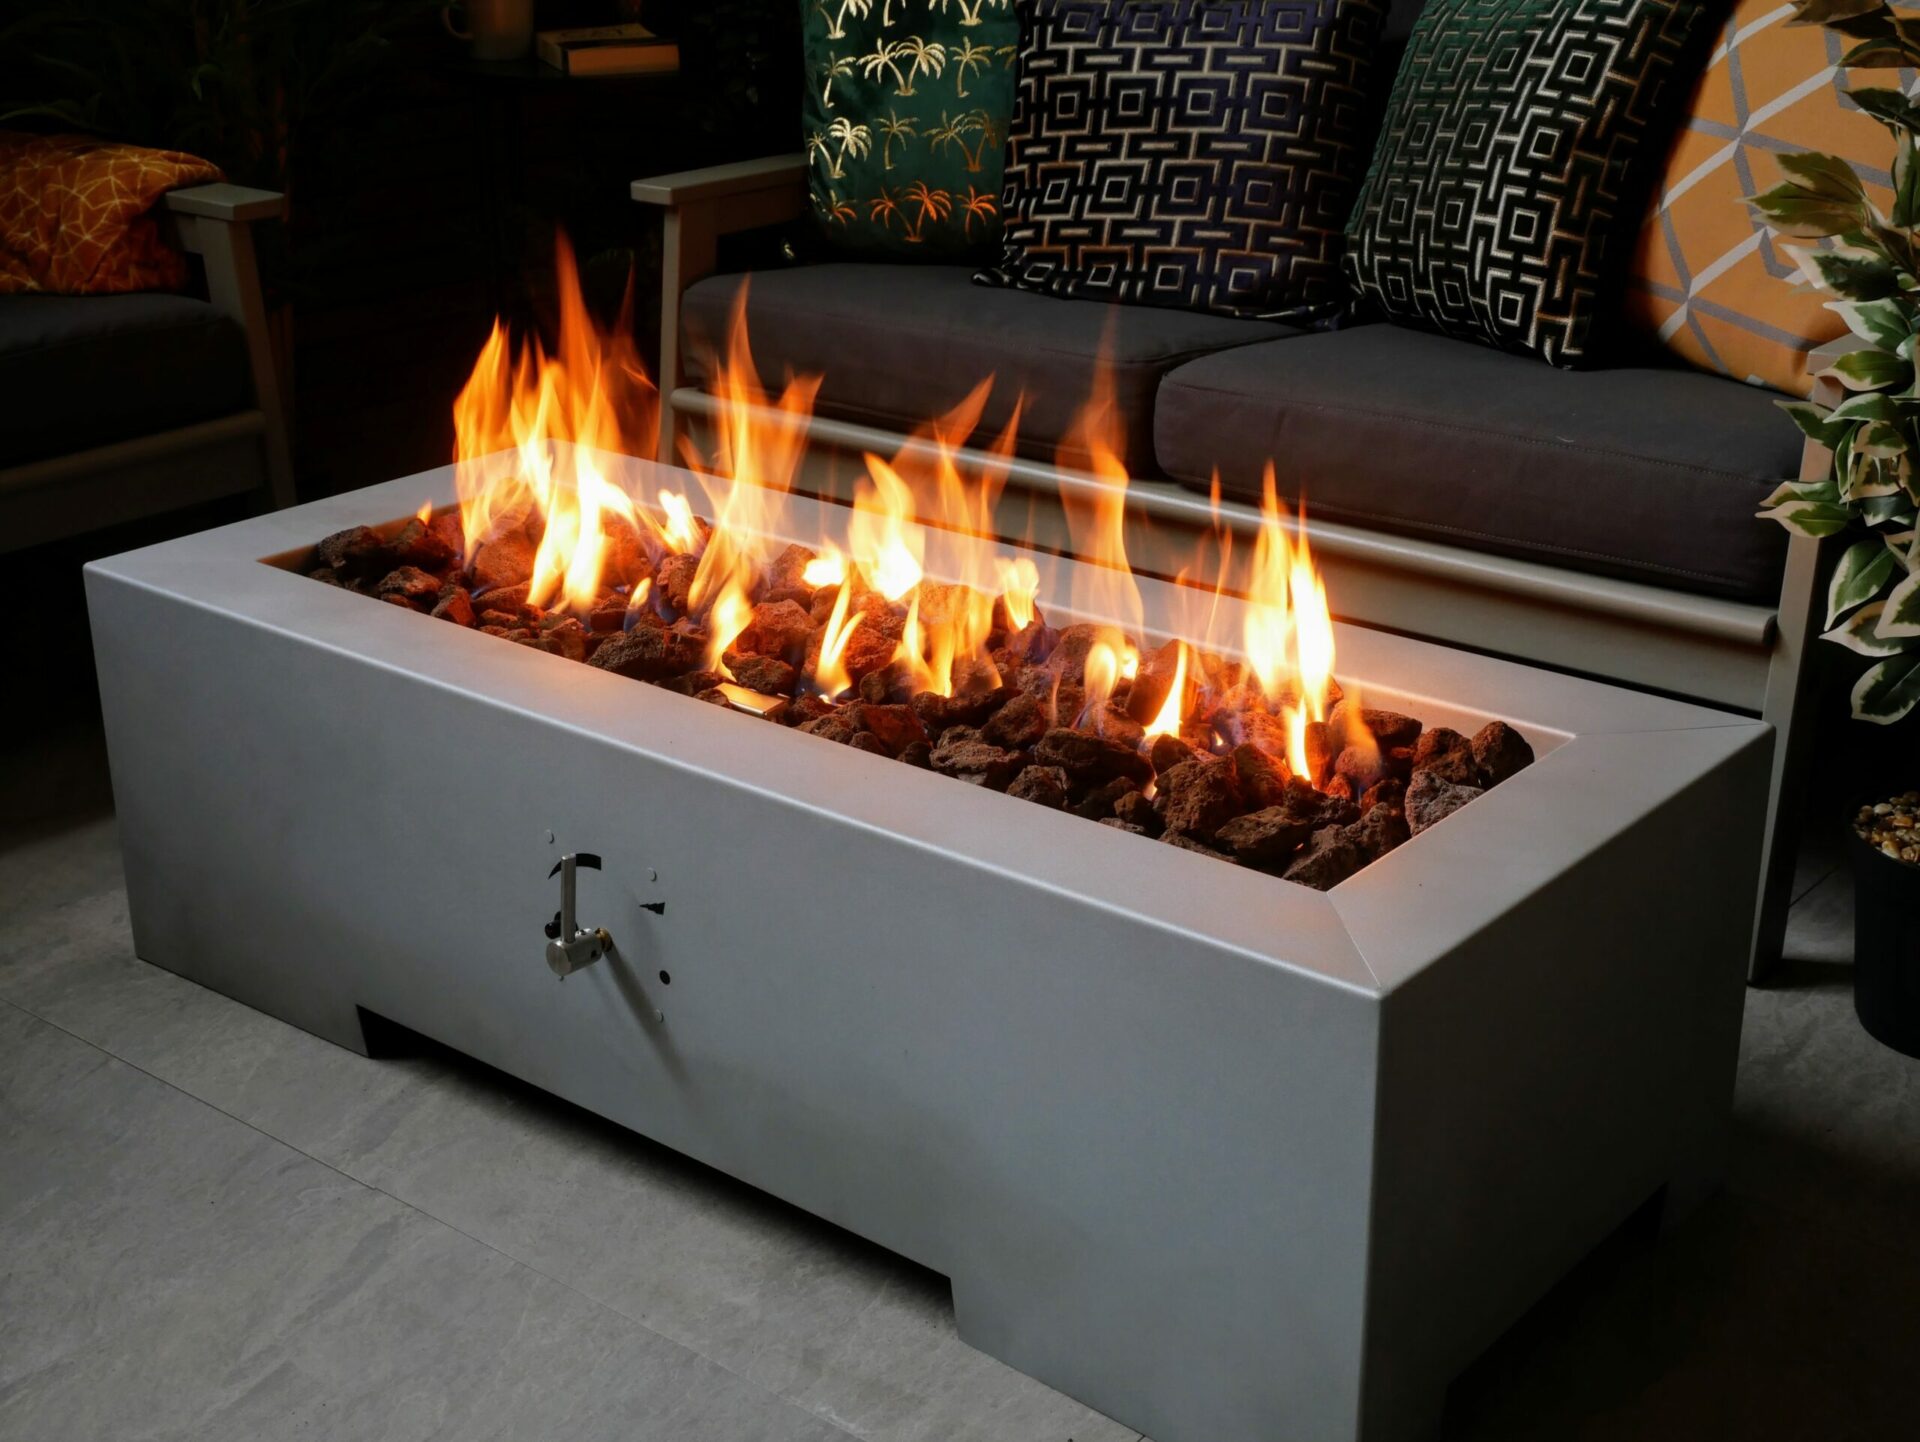 Beginners Guide to Gas Fire Pits - Brightstar Fires